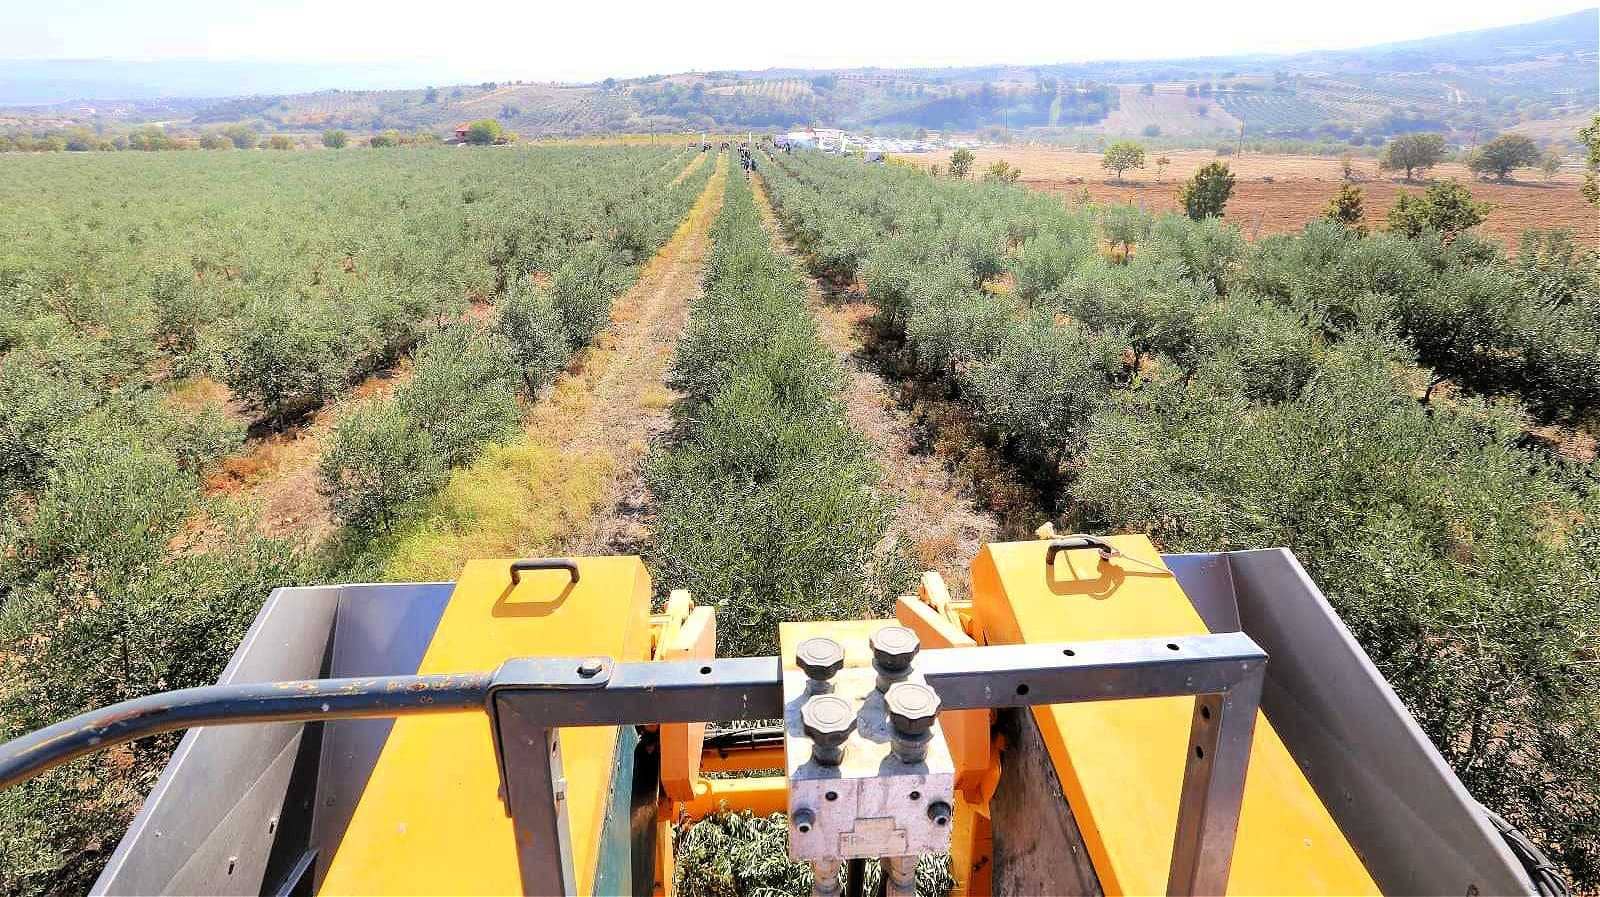 africa-middle-east-competitions-profiles-the-best-olive-oils-turkish-olive-oils-win-acclaim-in-world-competition-olive-oil-times